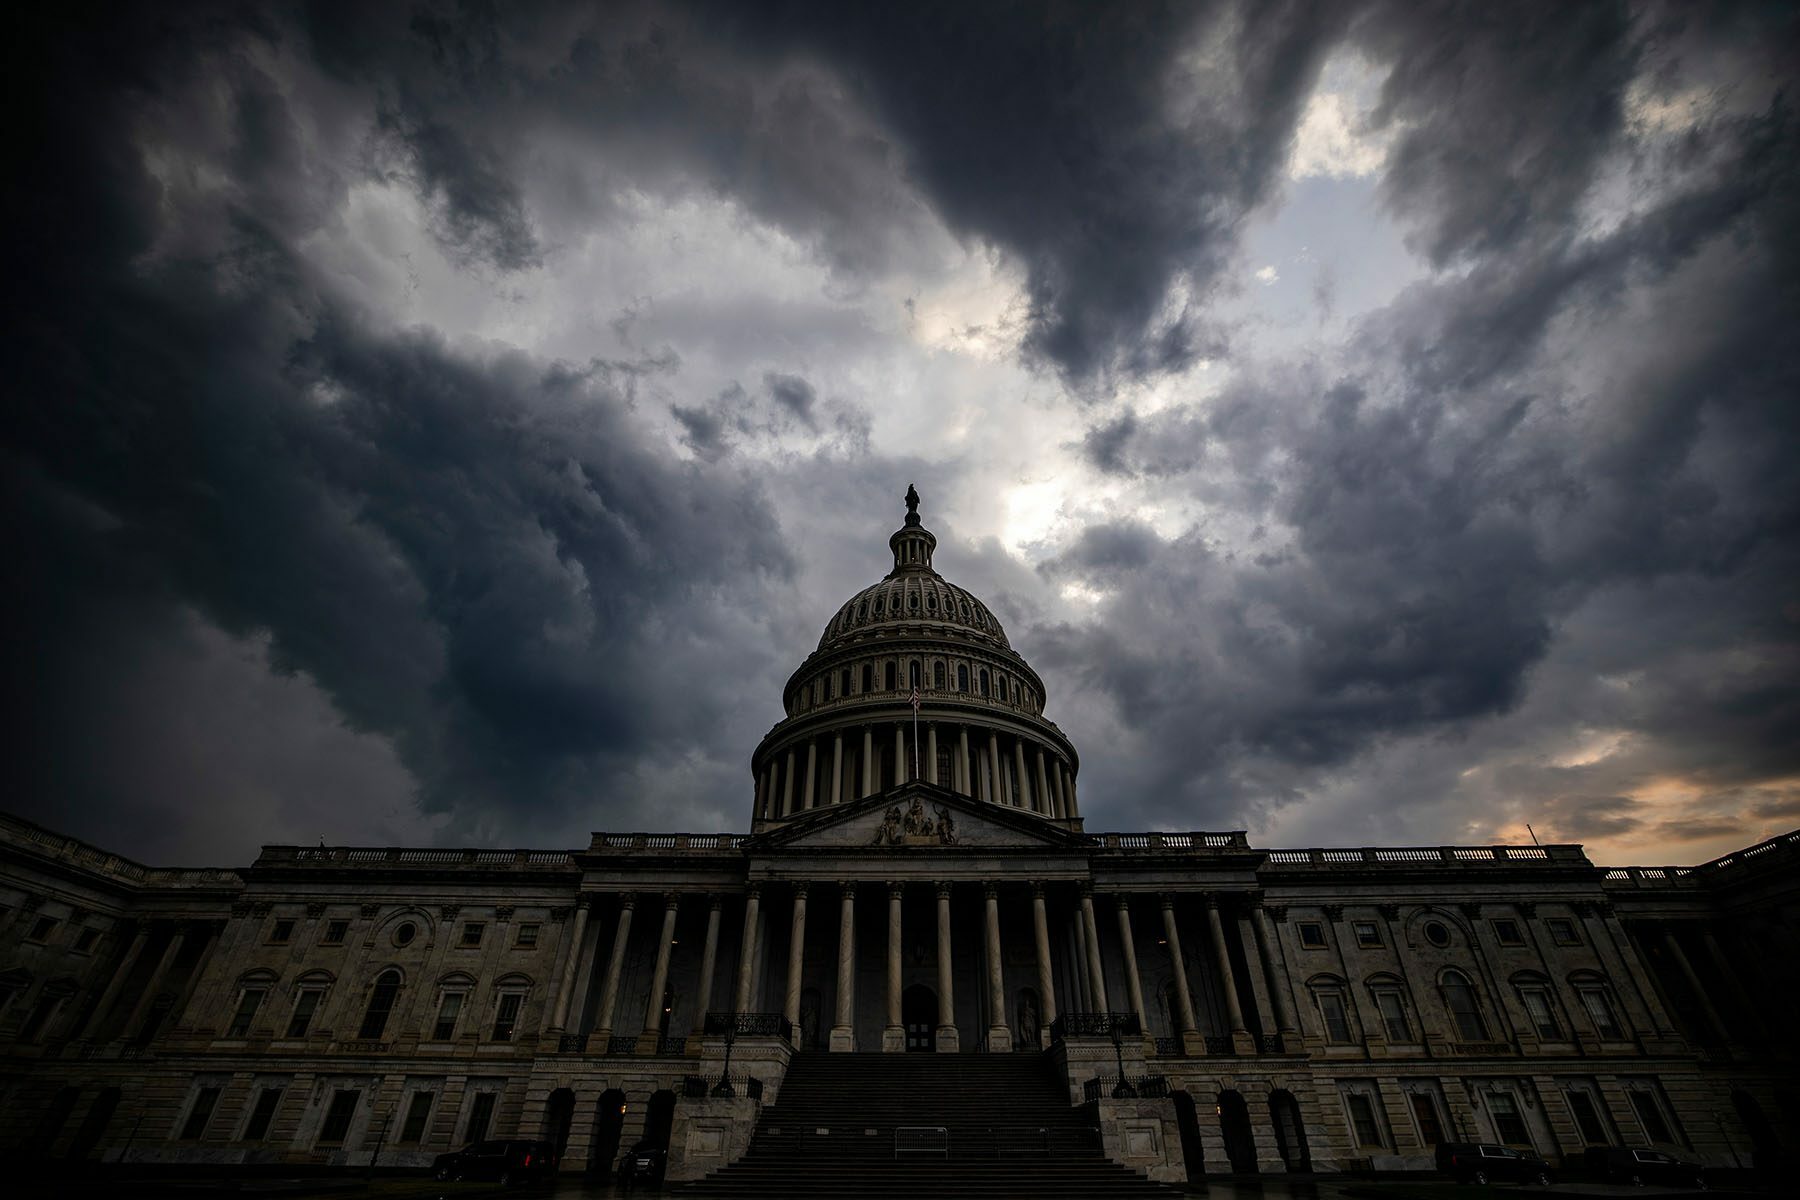 Storm clouds hang above the U.S. Capitol Building.